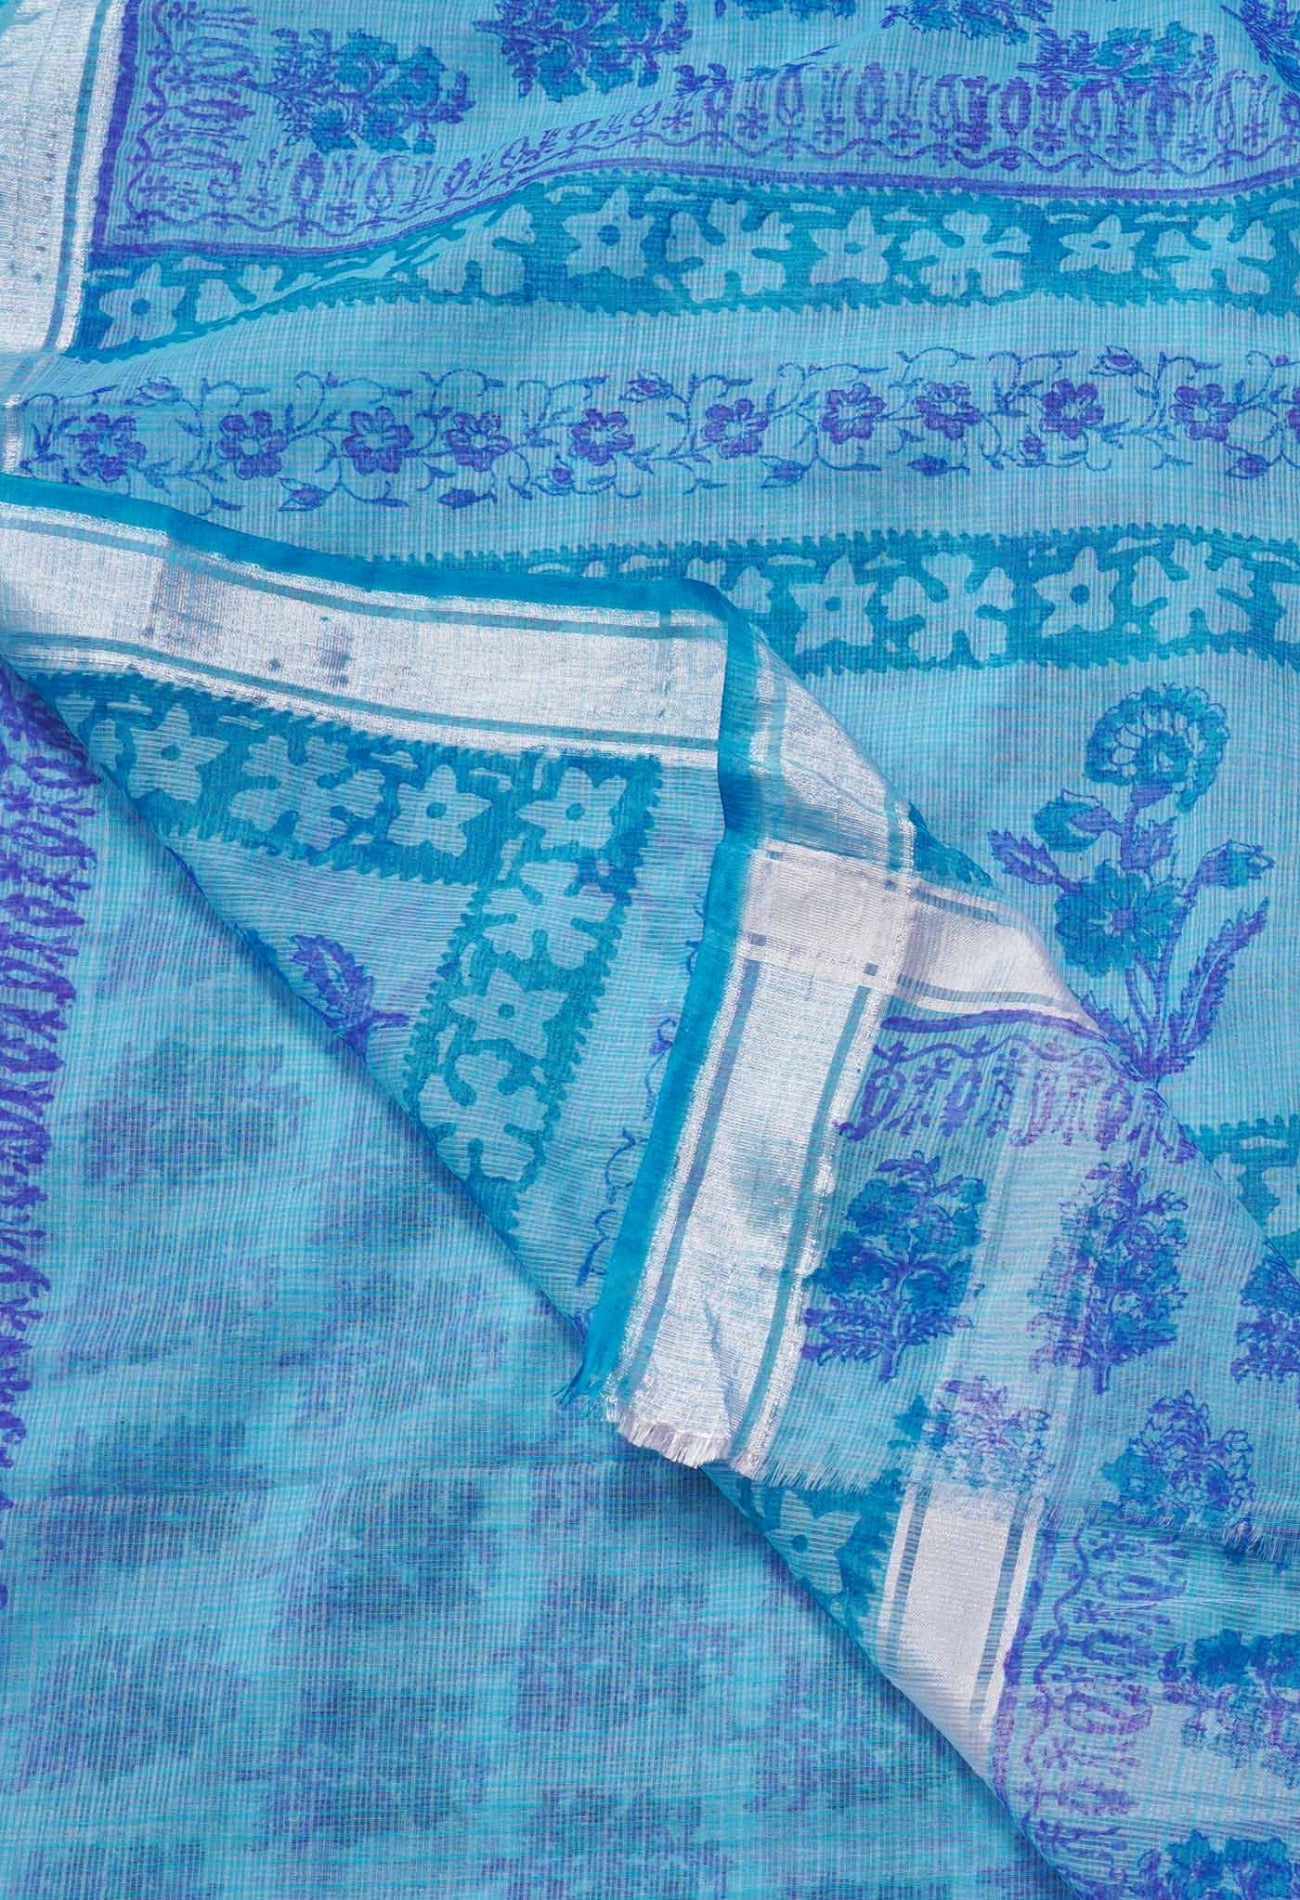 Online Shopping for Blue Pure Block Printed Cotton Saree with Hand Block Prints from Rajasthan at Unnatisilks.com India
